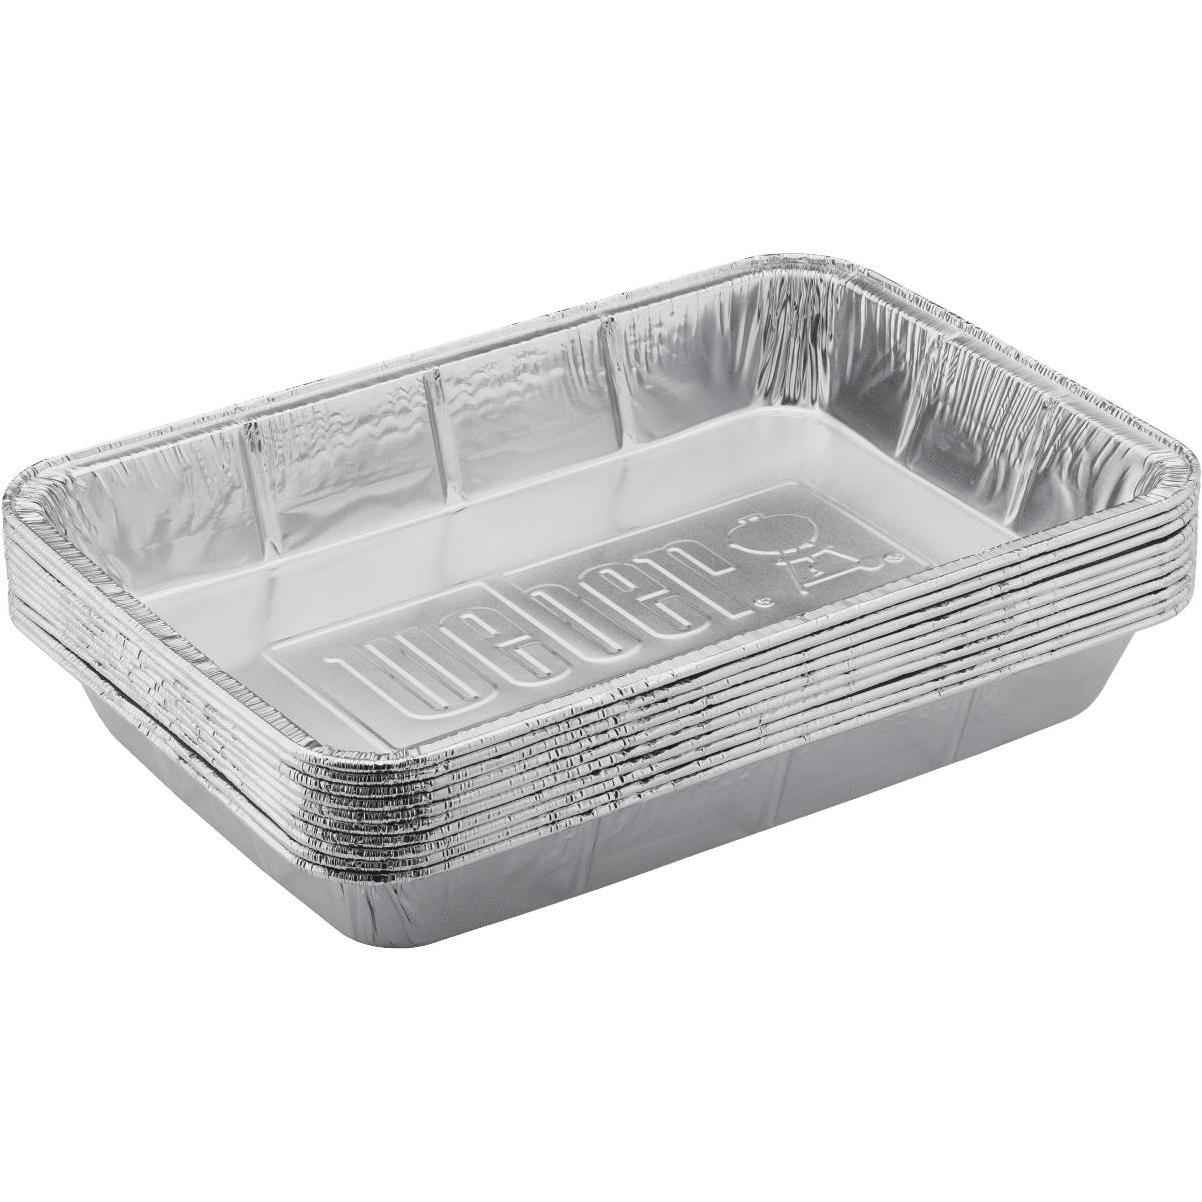 Kingsford All purpose pans 15.75-in x 11.25-in W Disposable